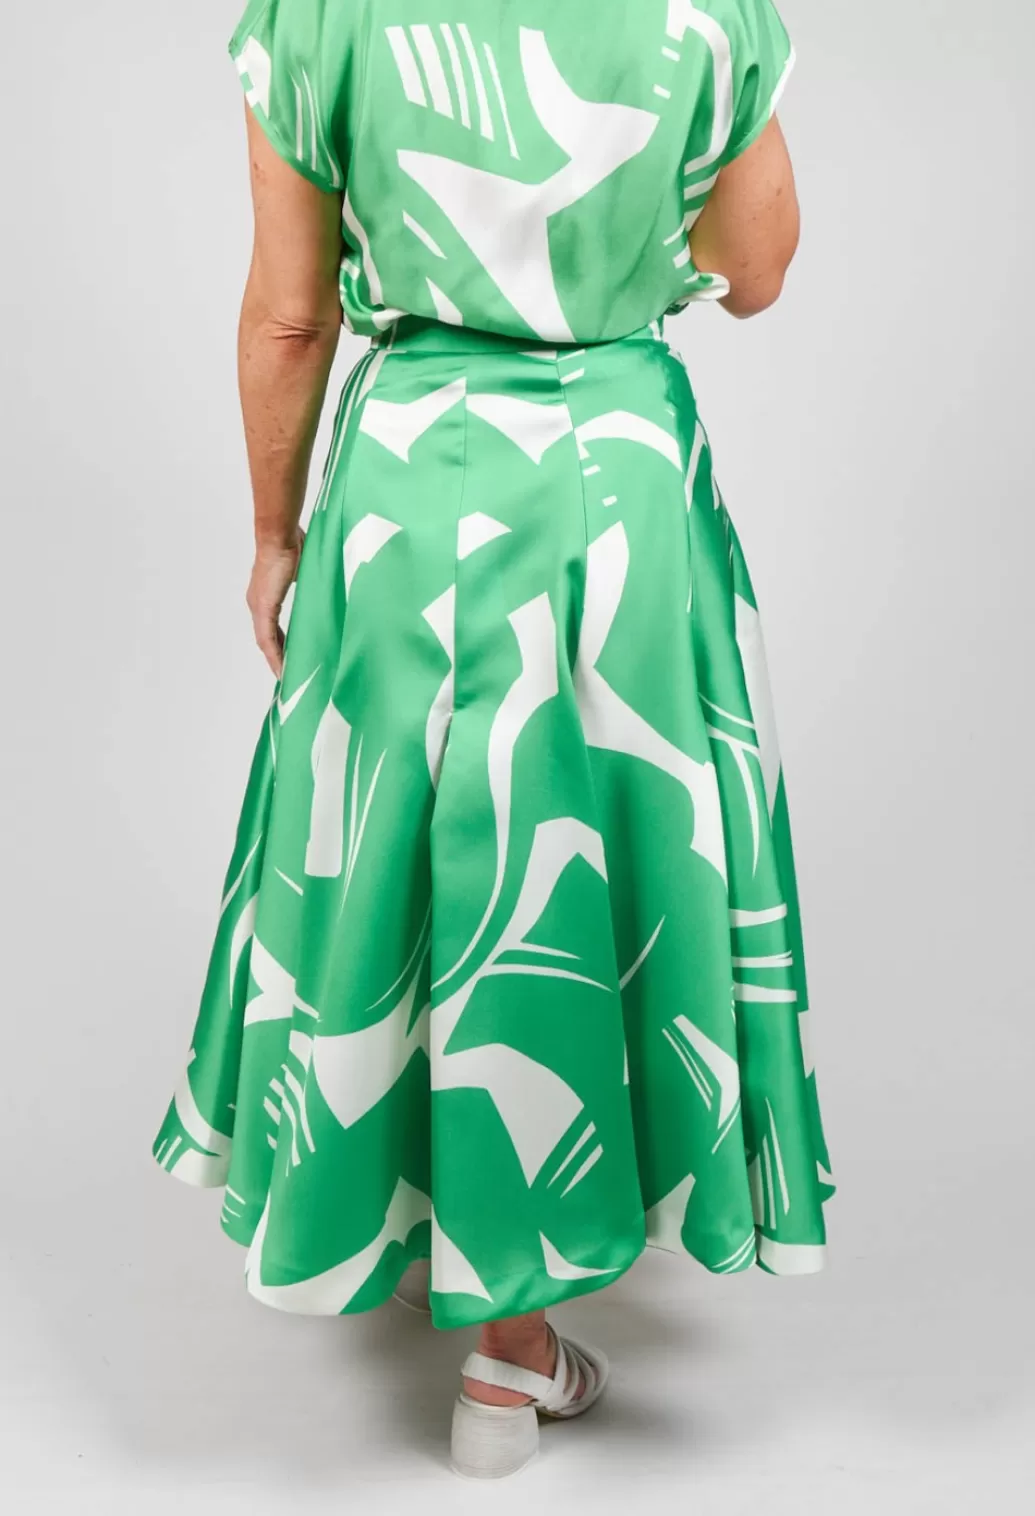 Skirts^Beatrice B A-Line Pleated Skirt In Green Matisse